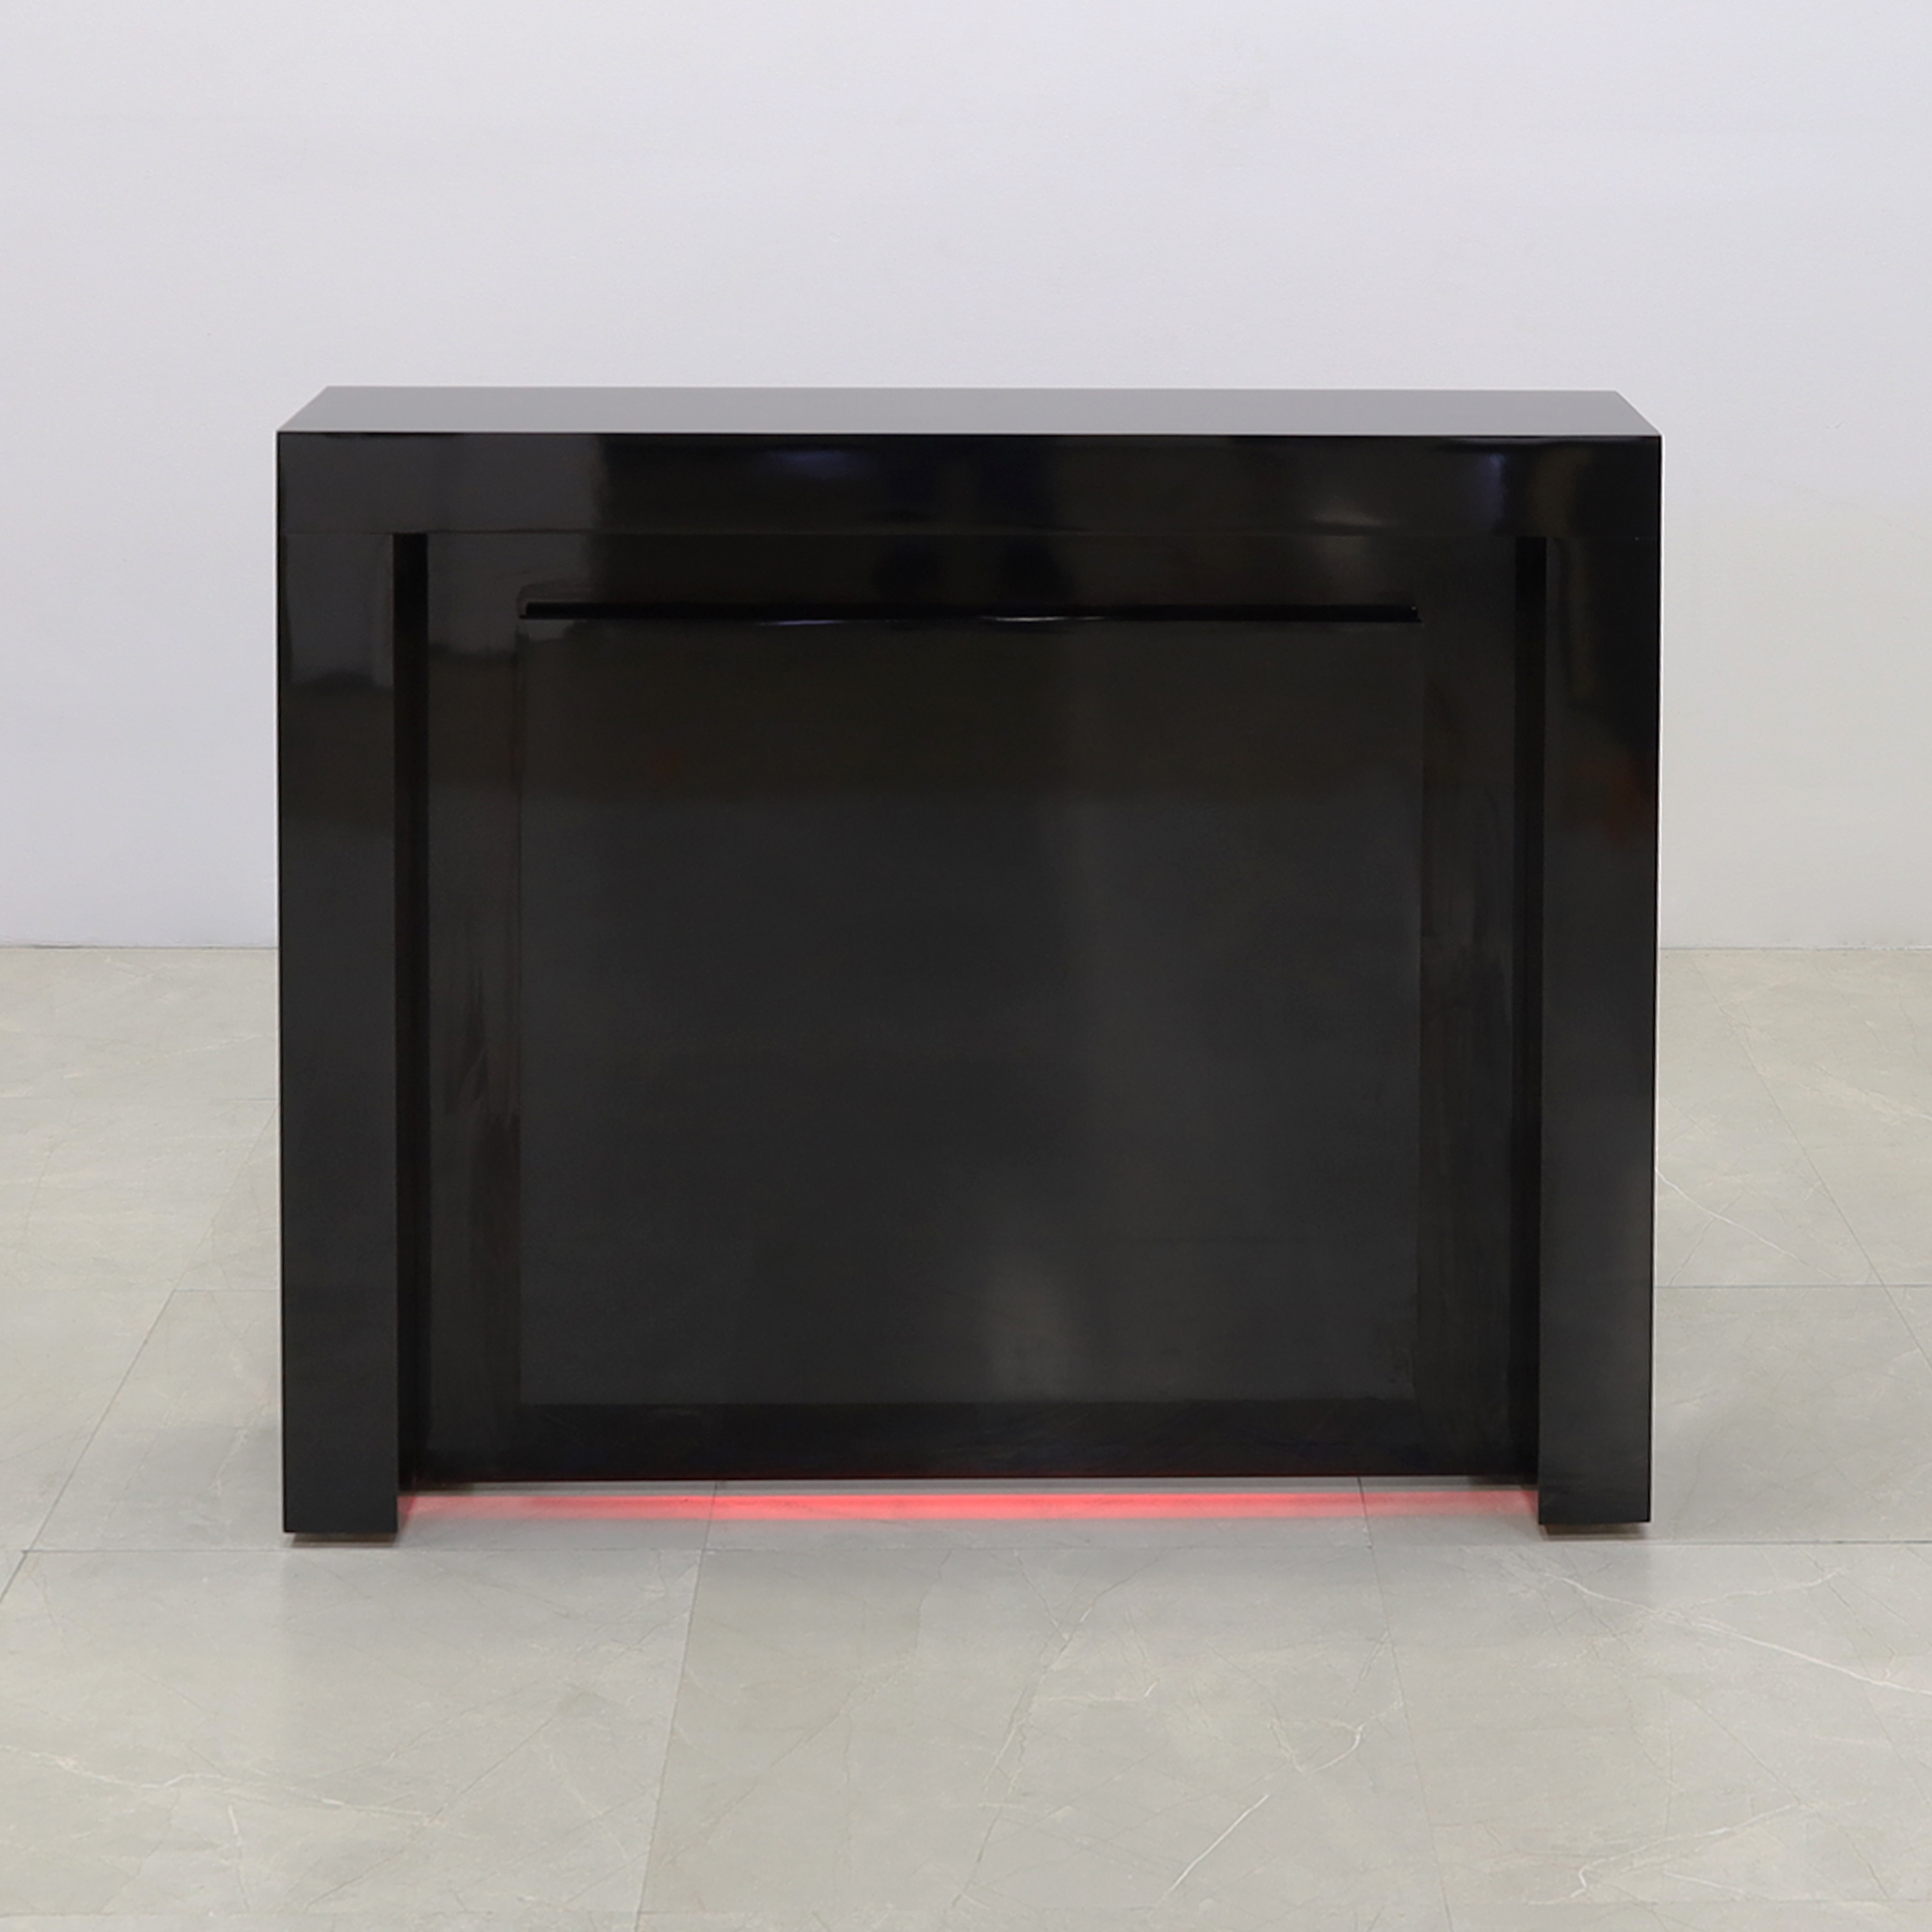 48 inches New York reception Desk in black gloss laminate finish desk, counter and front panel, with multi-colored LED shown here.